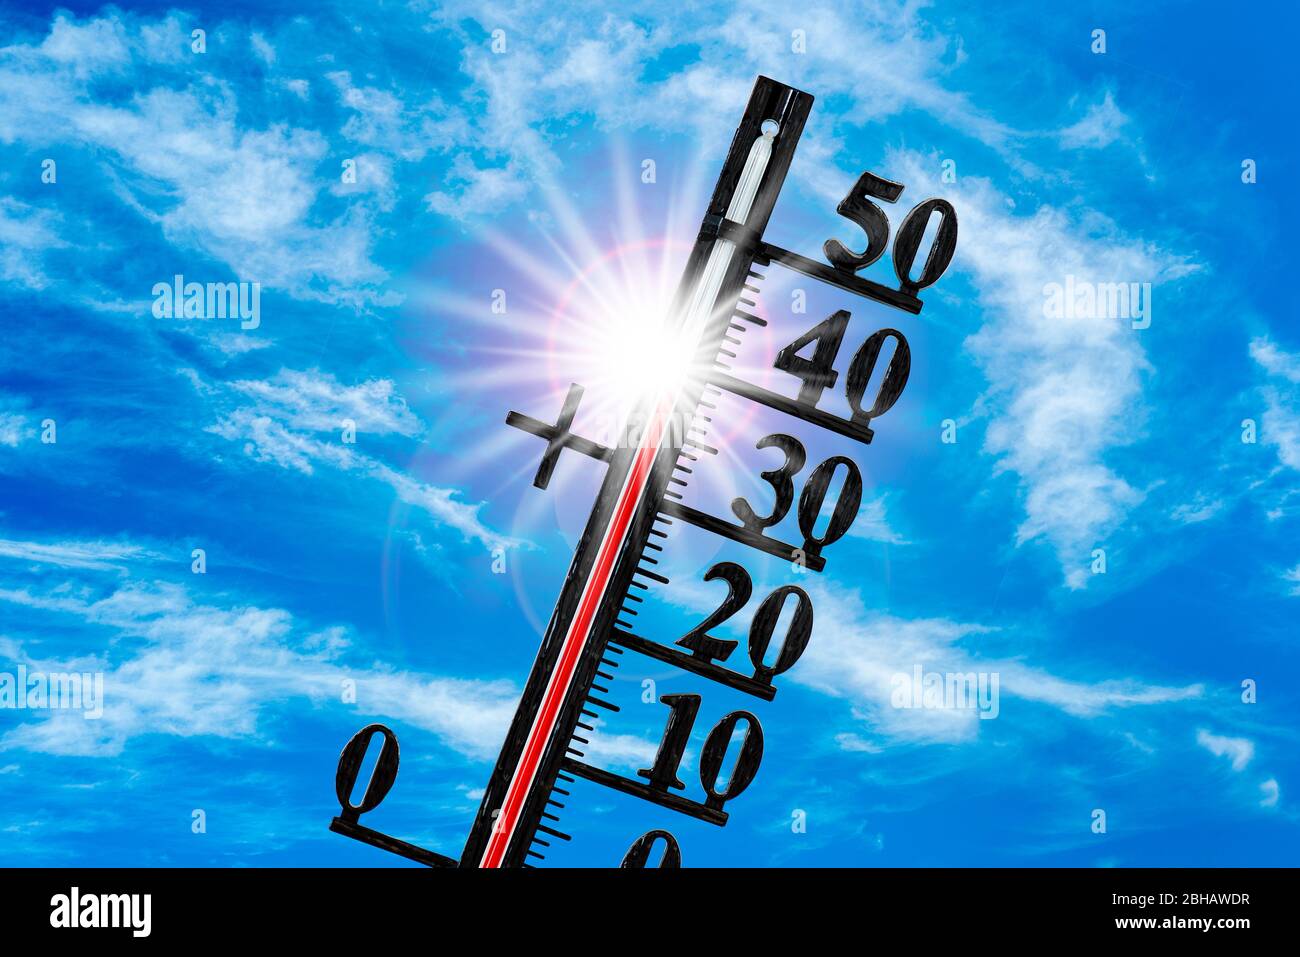 Thermometer shows 40 degrees at heat wave Stock Photo